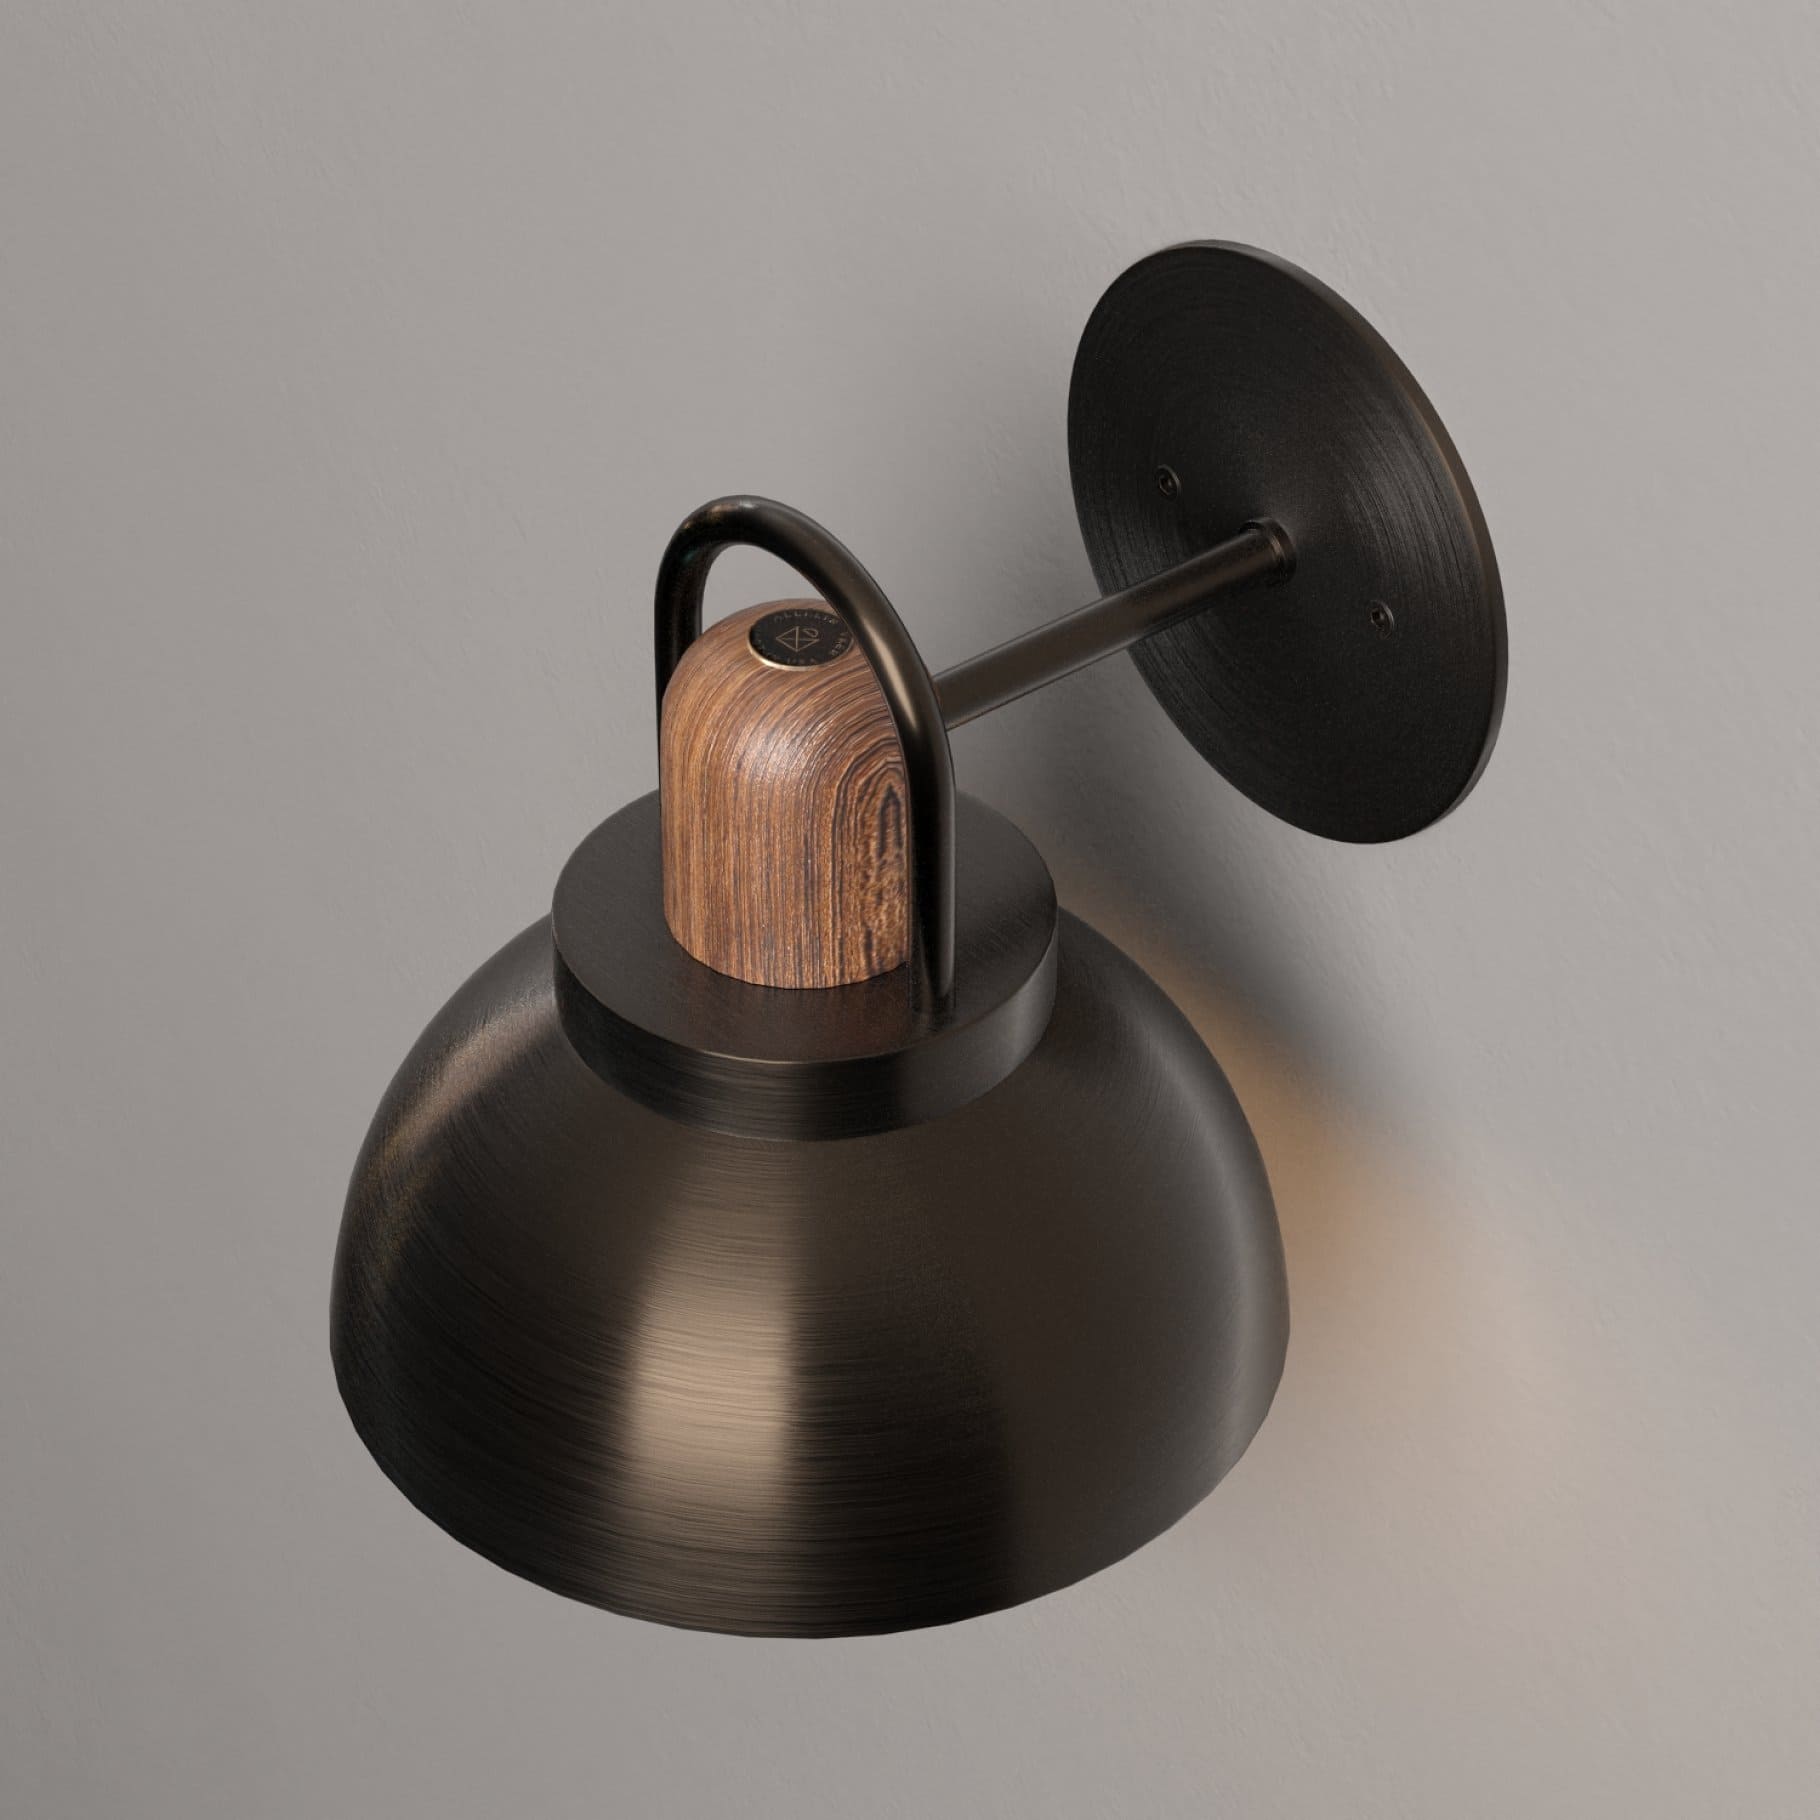 Metal body of the lamp with a wooden element.